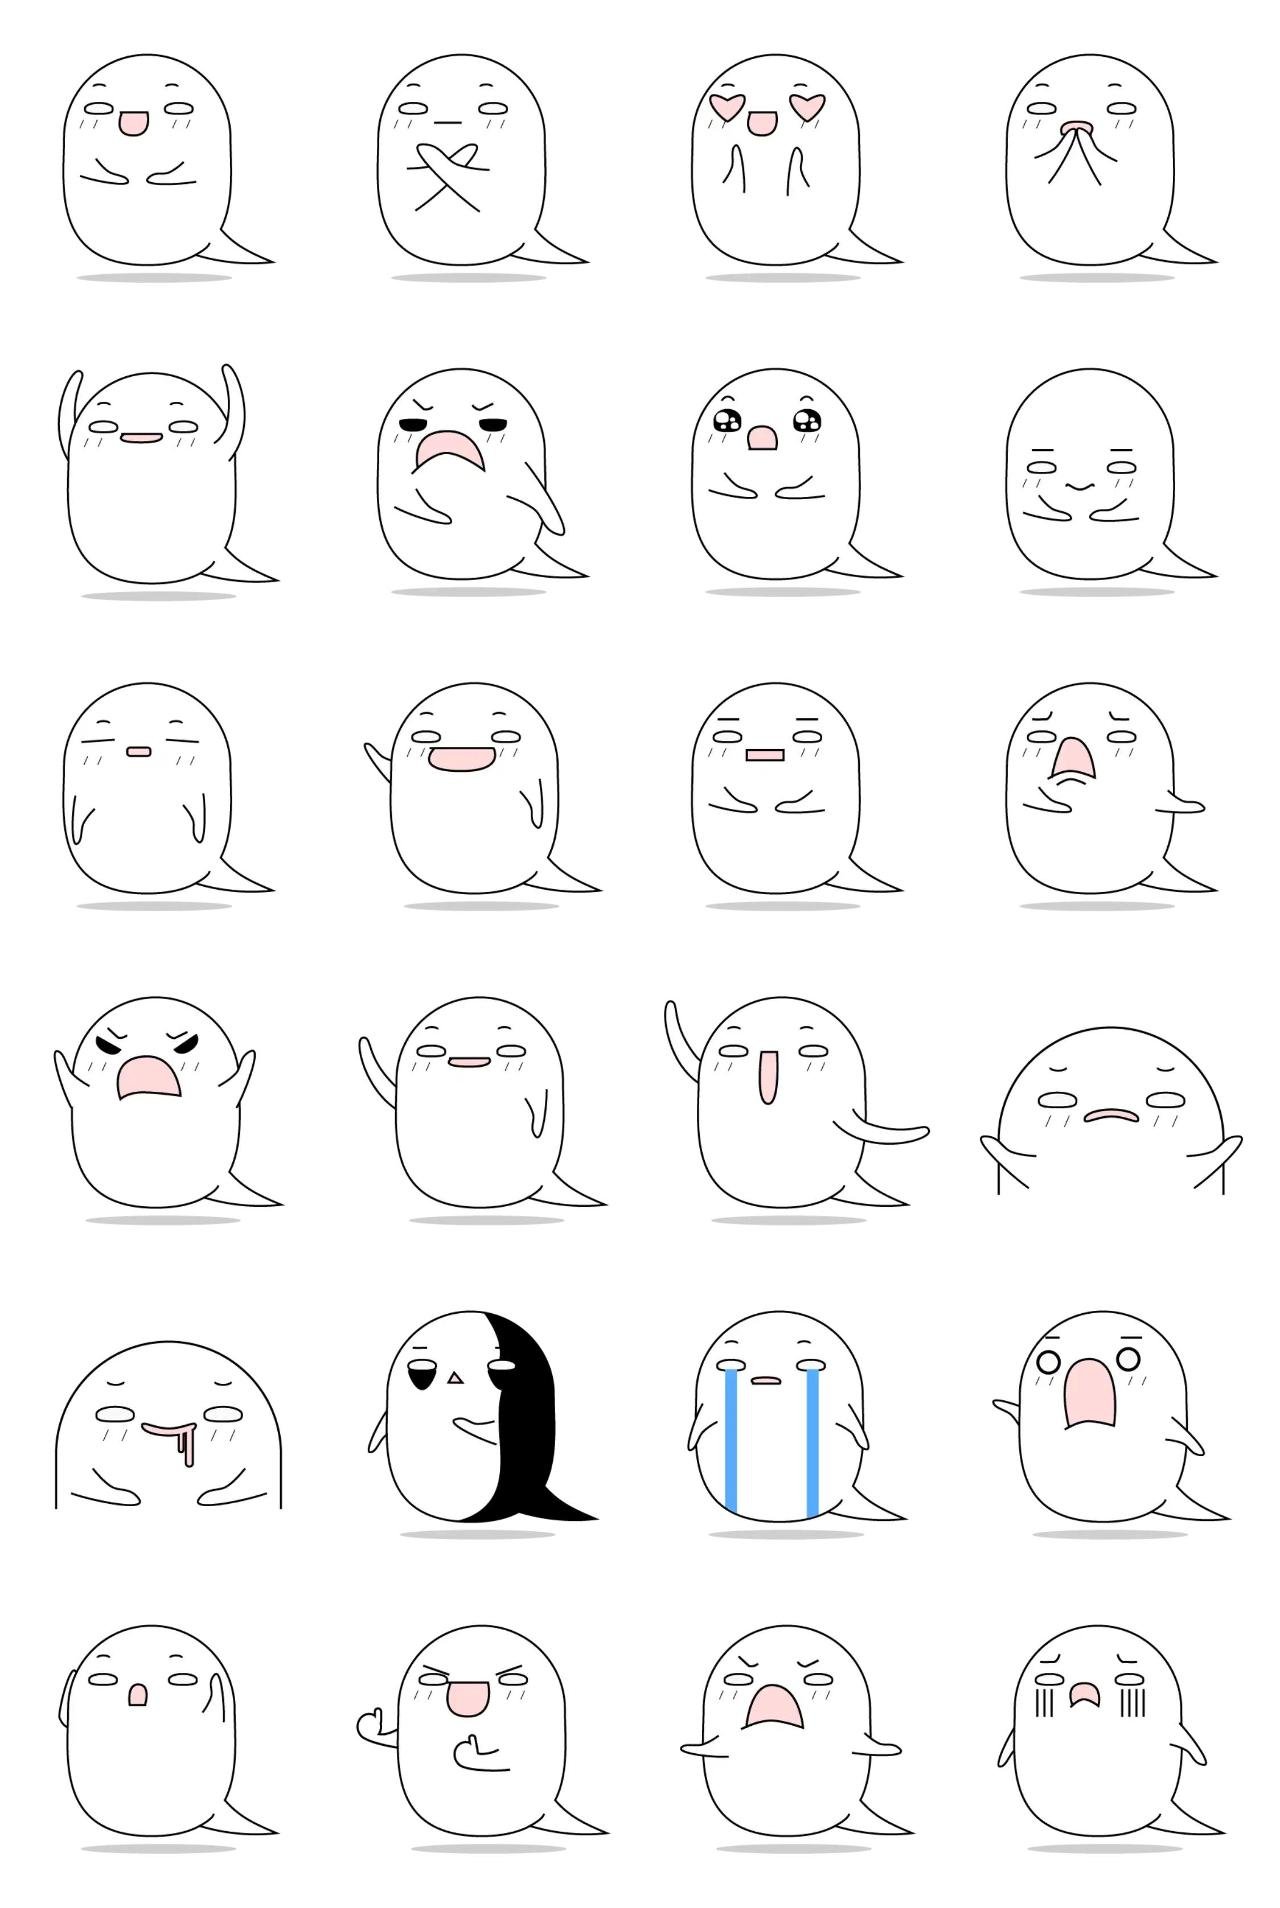 Speech Bubble Ghost Gag,Phrases sticker pack for Whatsapp, Telegram, Signal, and others chatting and message apps